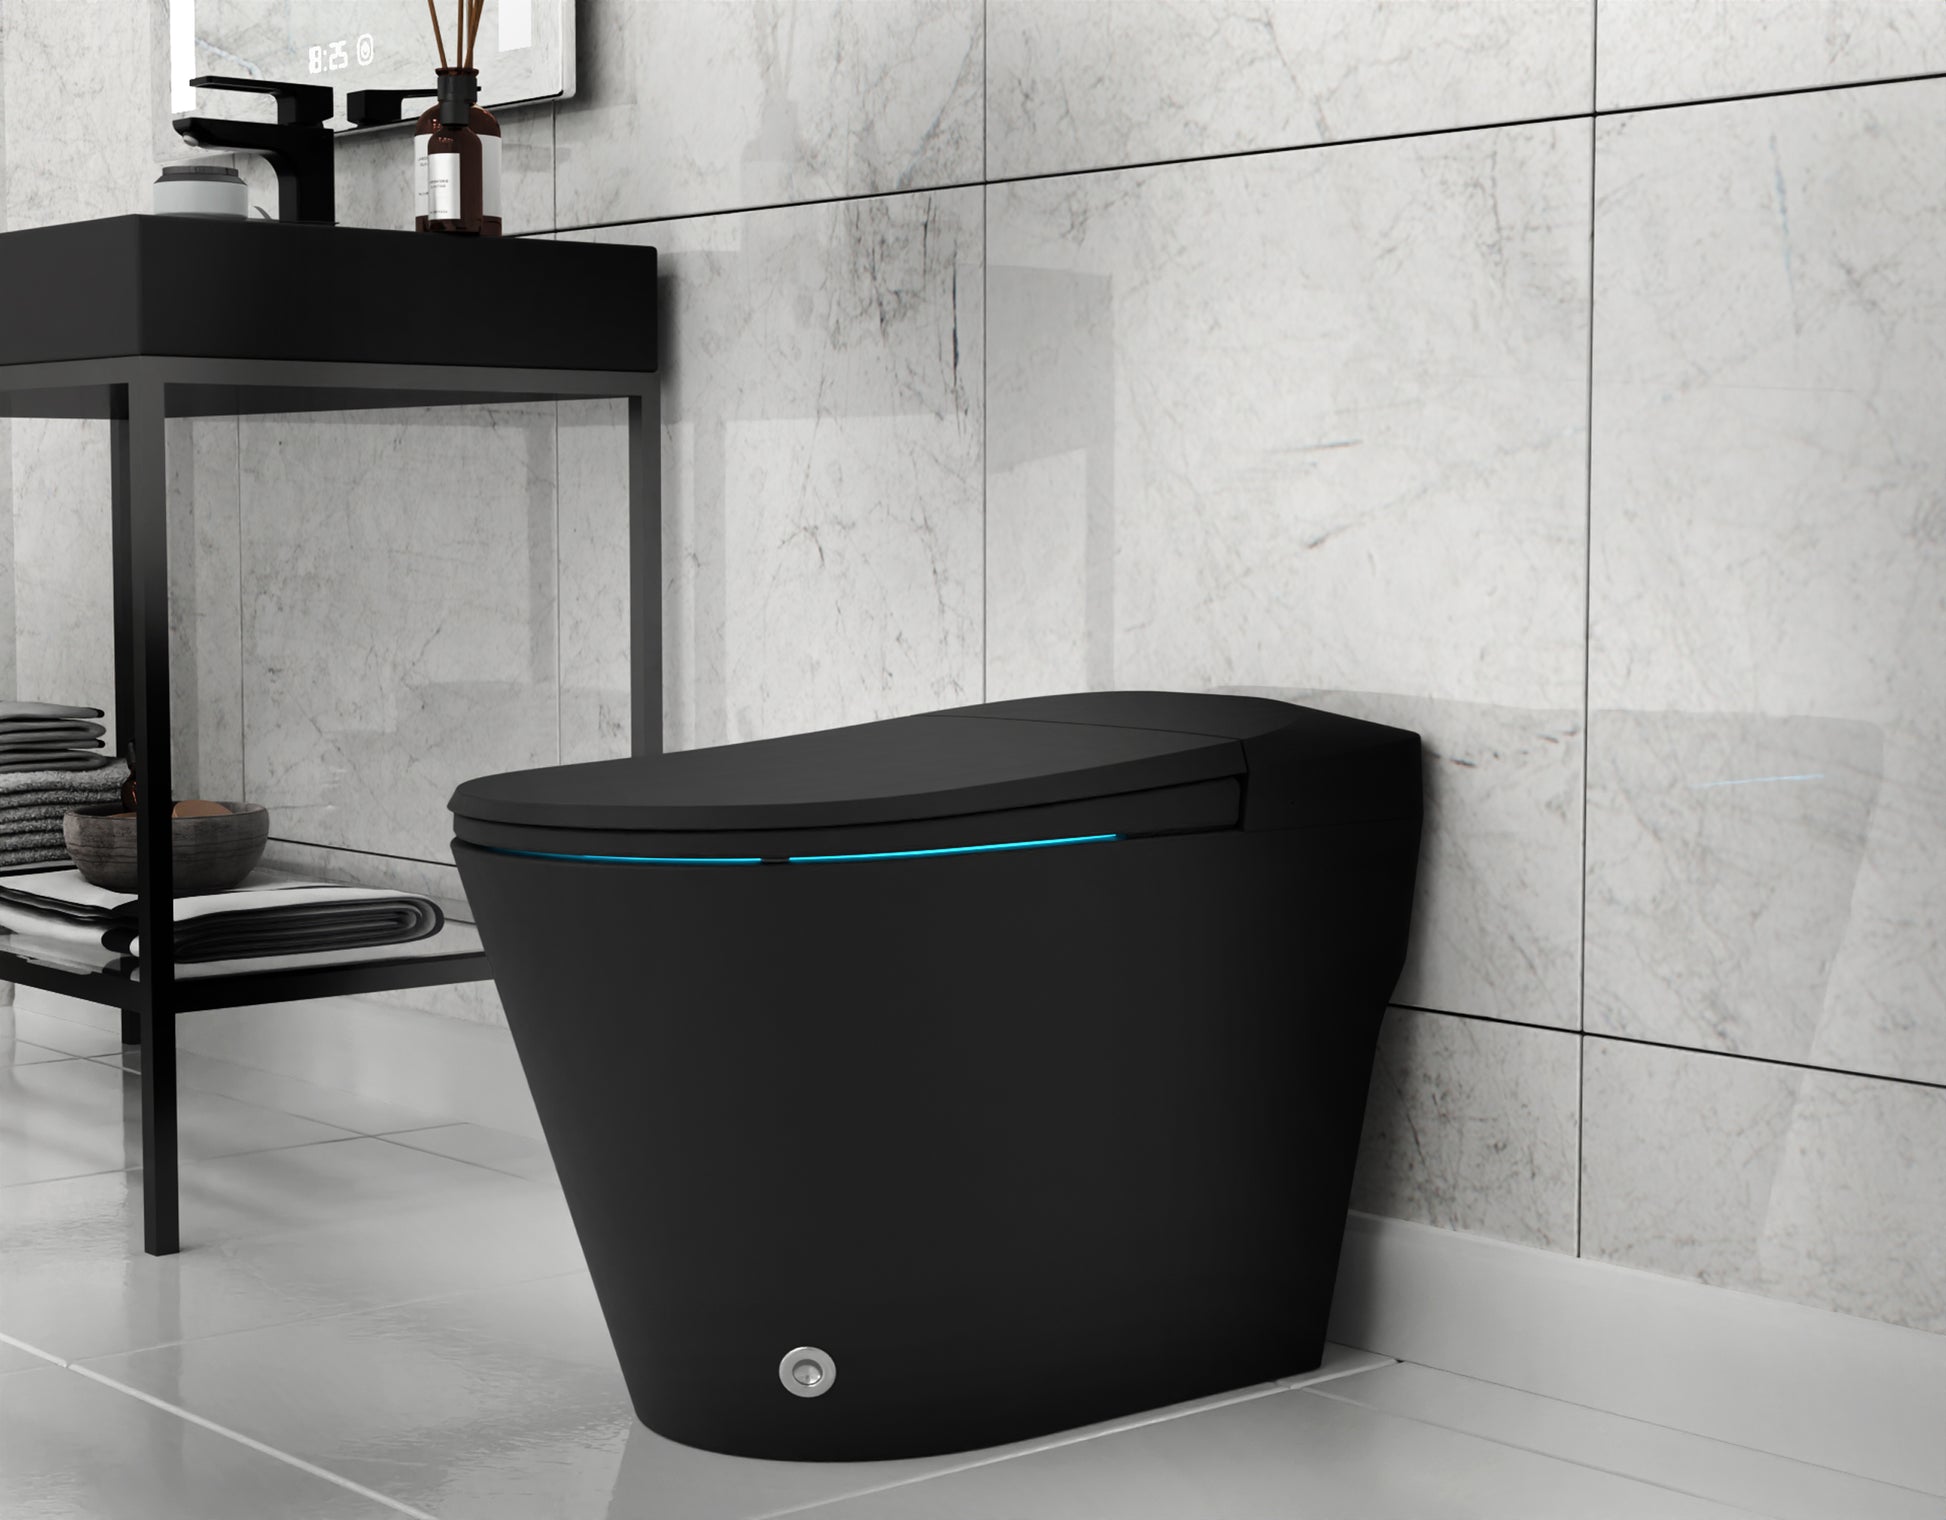 TL-ST950WIFI-MB - ENVO Echo Elongated Smart Toilet Bidet in Matte Black with Auto Open, Auto Flush, Voice and Wifi Controls